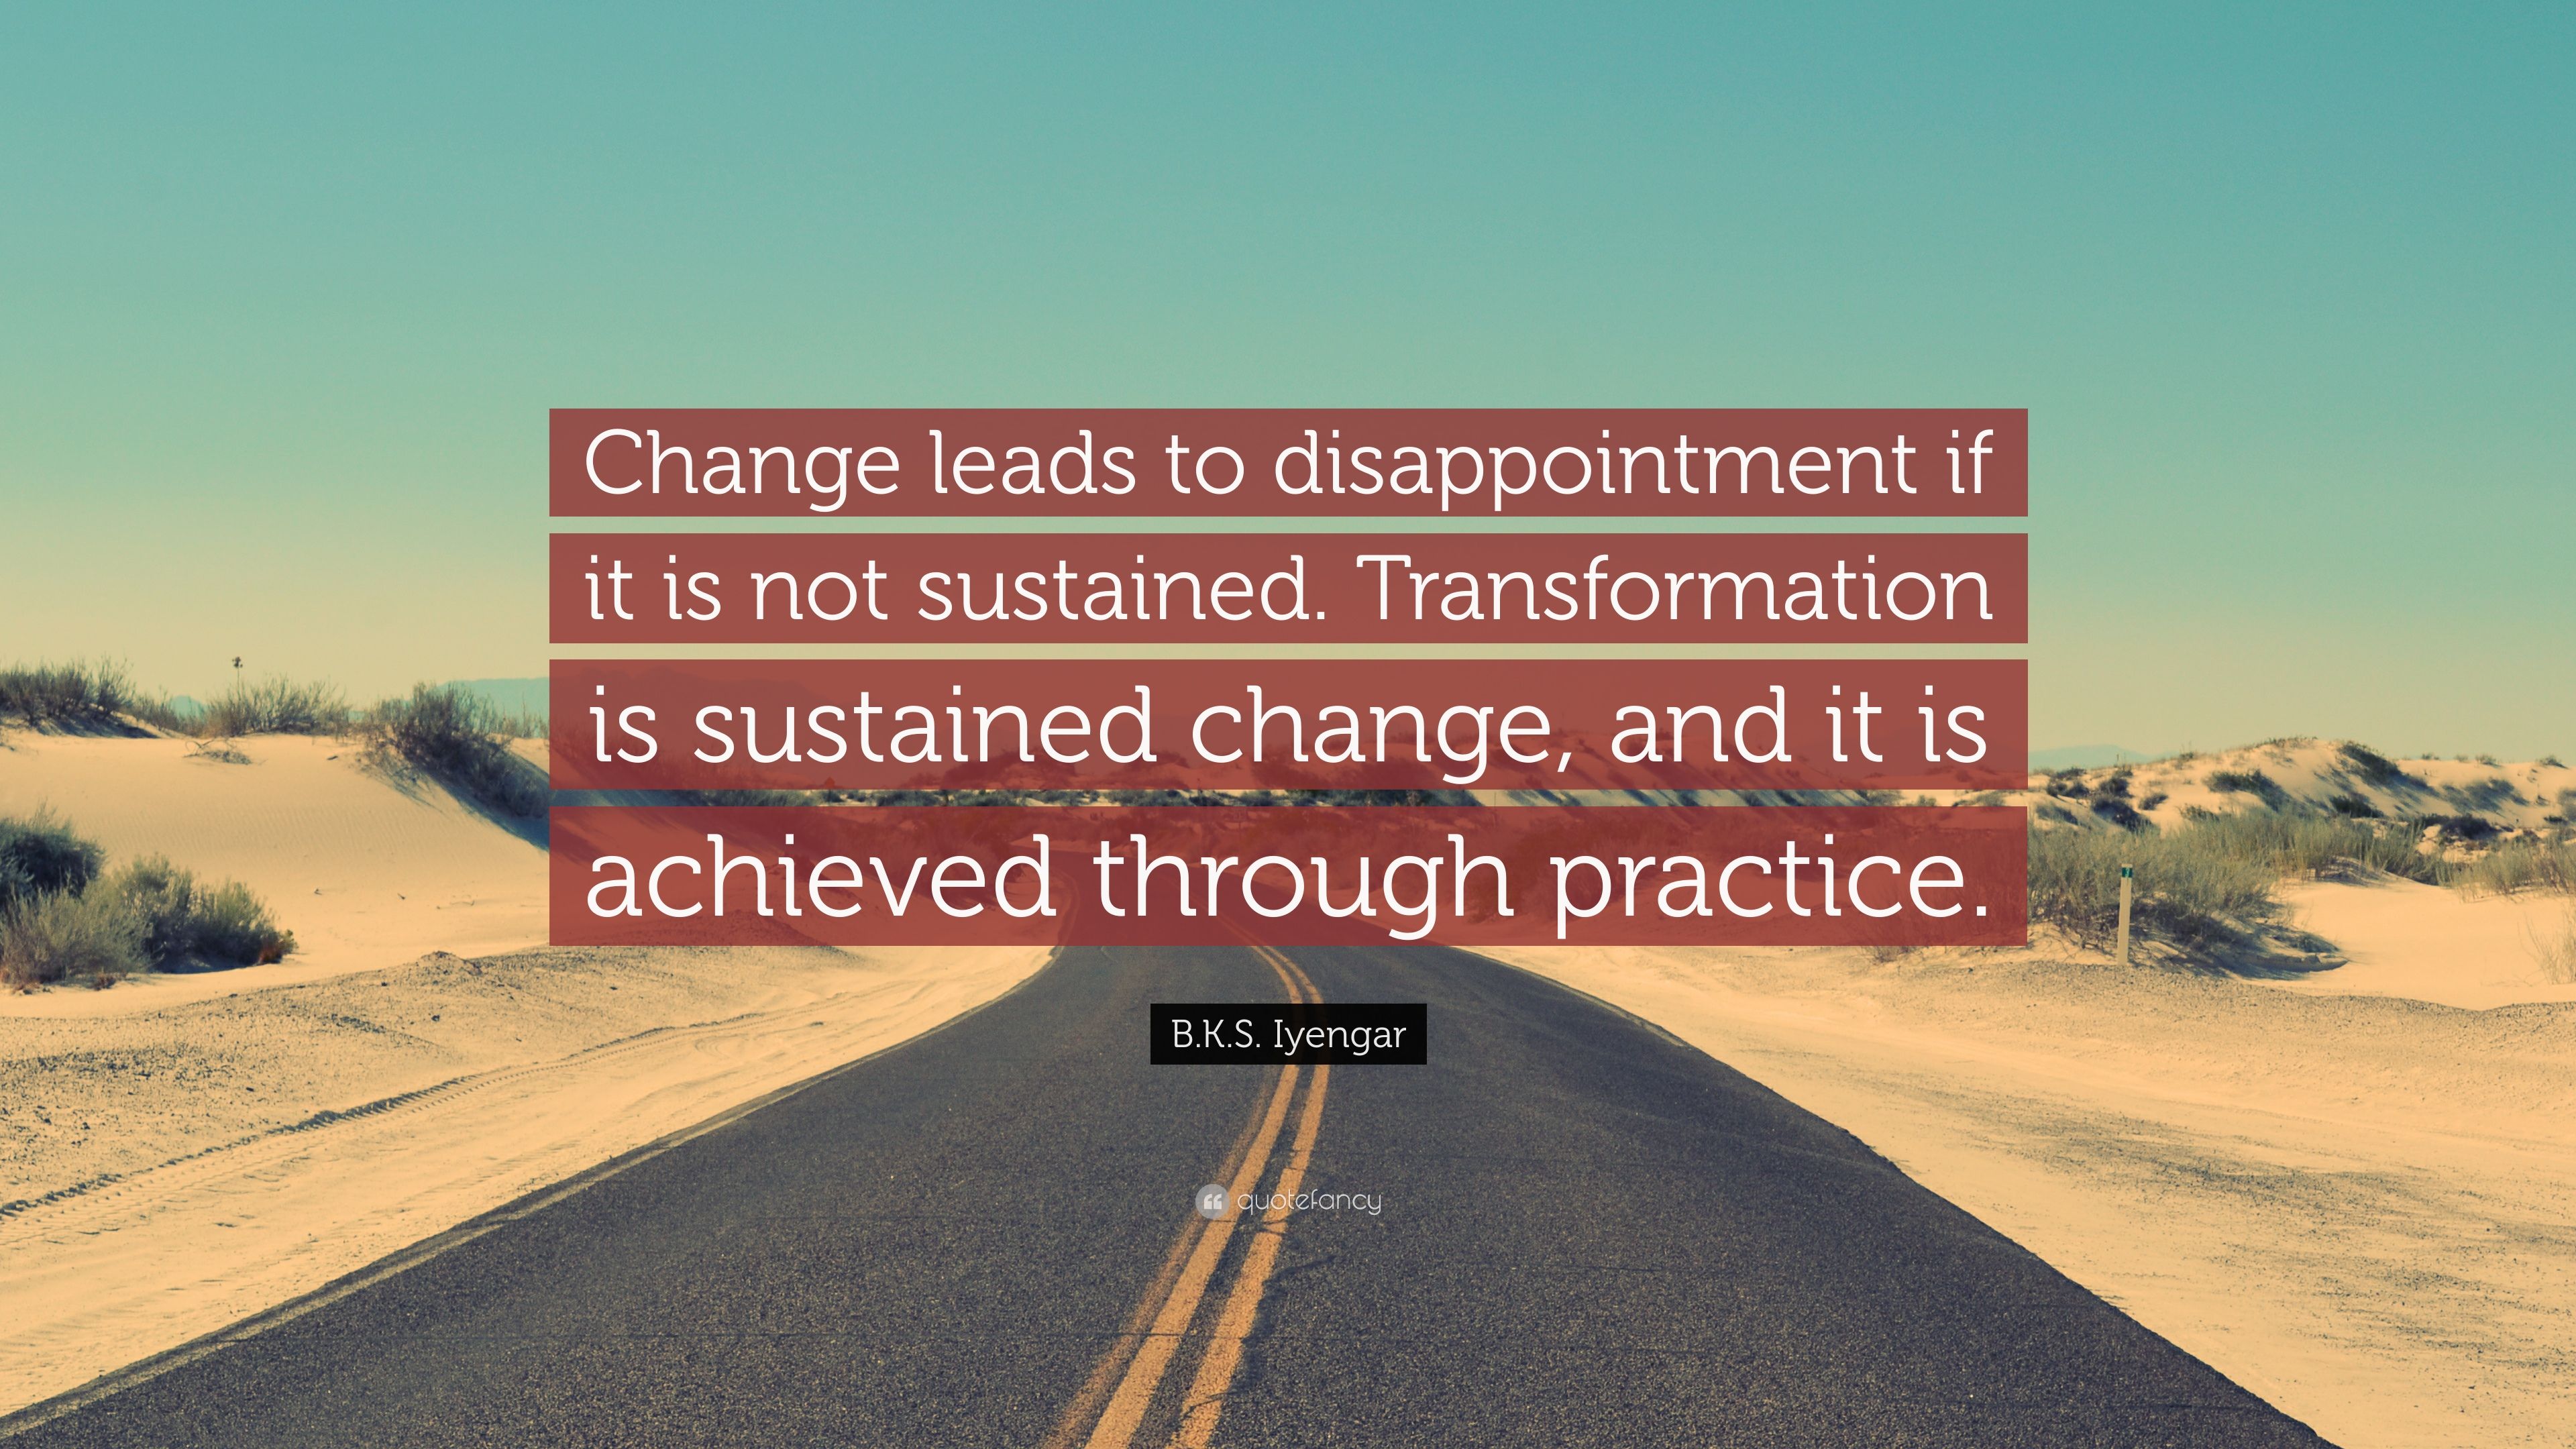 B.K.S. Iyengar Quote: “Change leads to disappointment if it is not sustained. Transformation is sustained change, and it is achieved through pr.” (10 wallpaper)